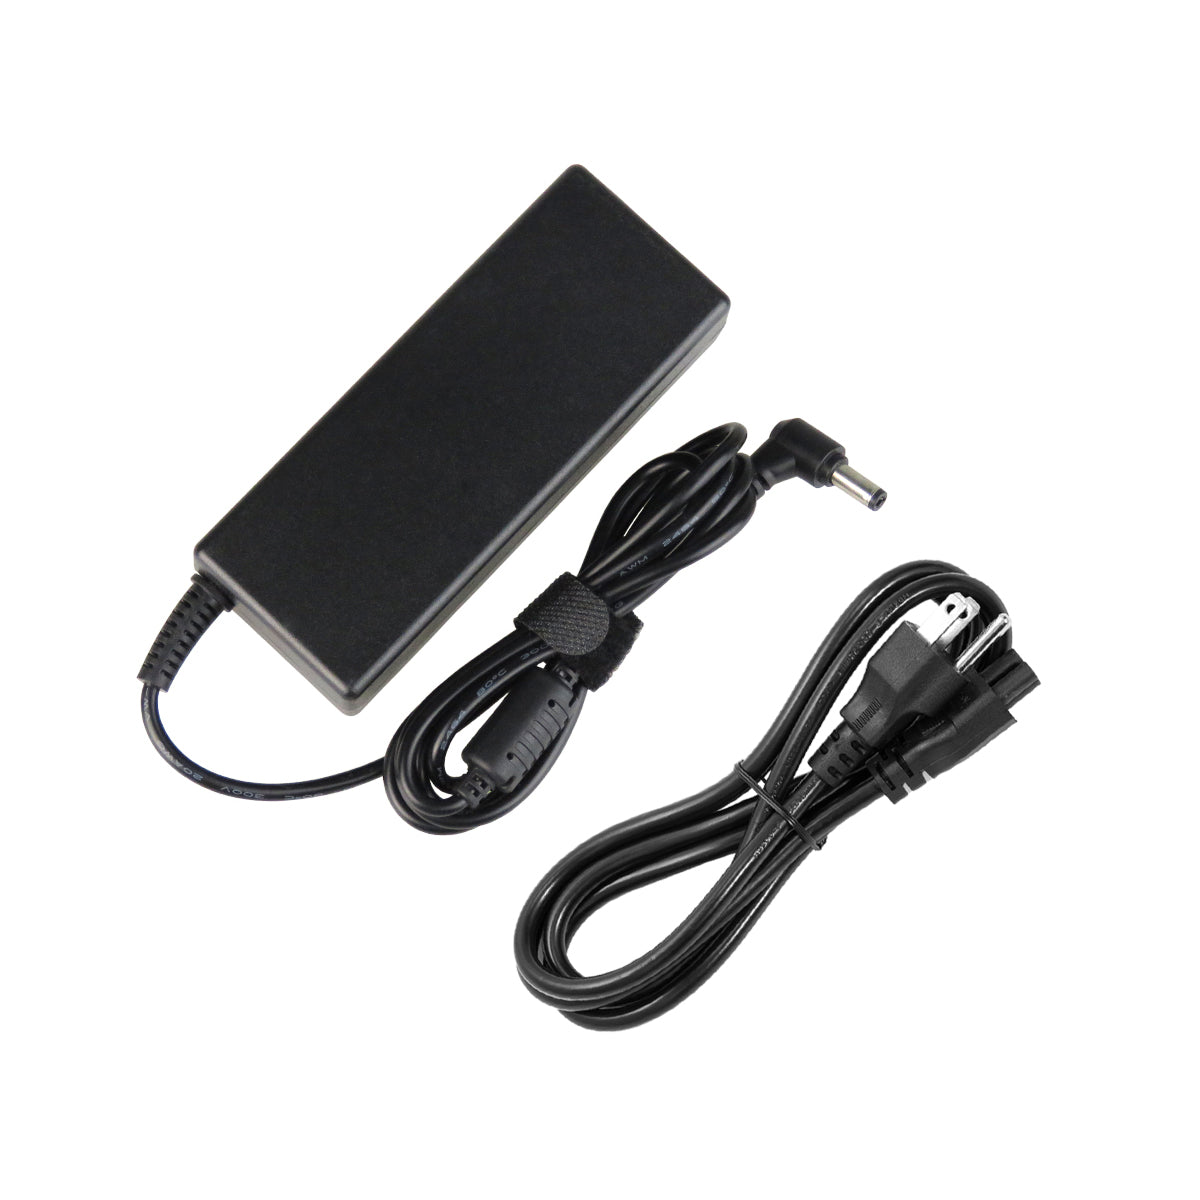 AC Adapter Charger for Gateway T-63 Series T-6330u Notebook.